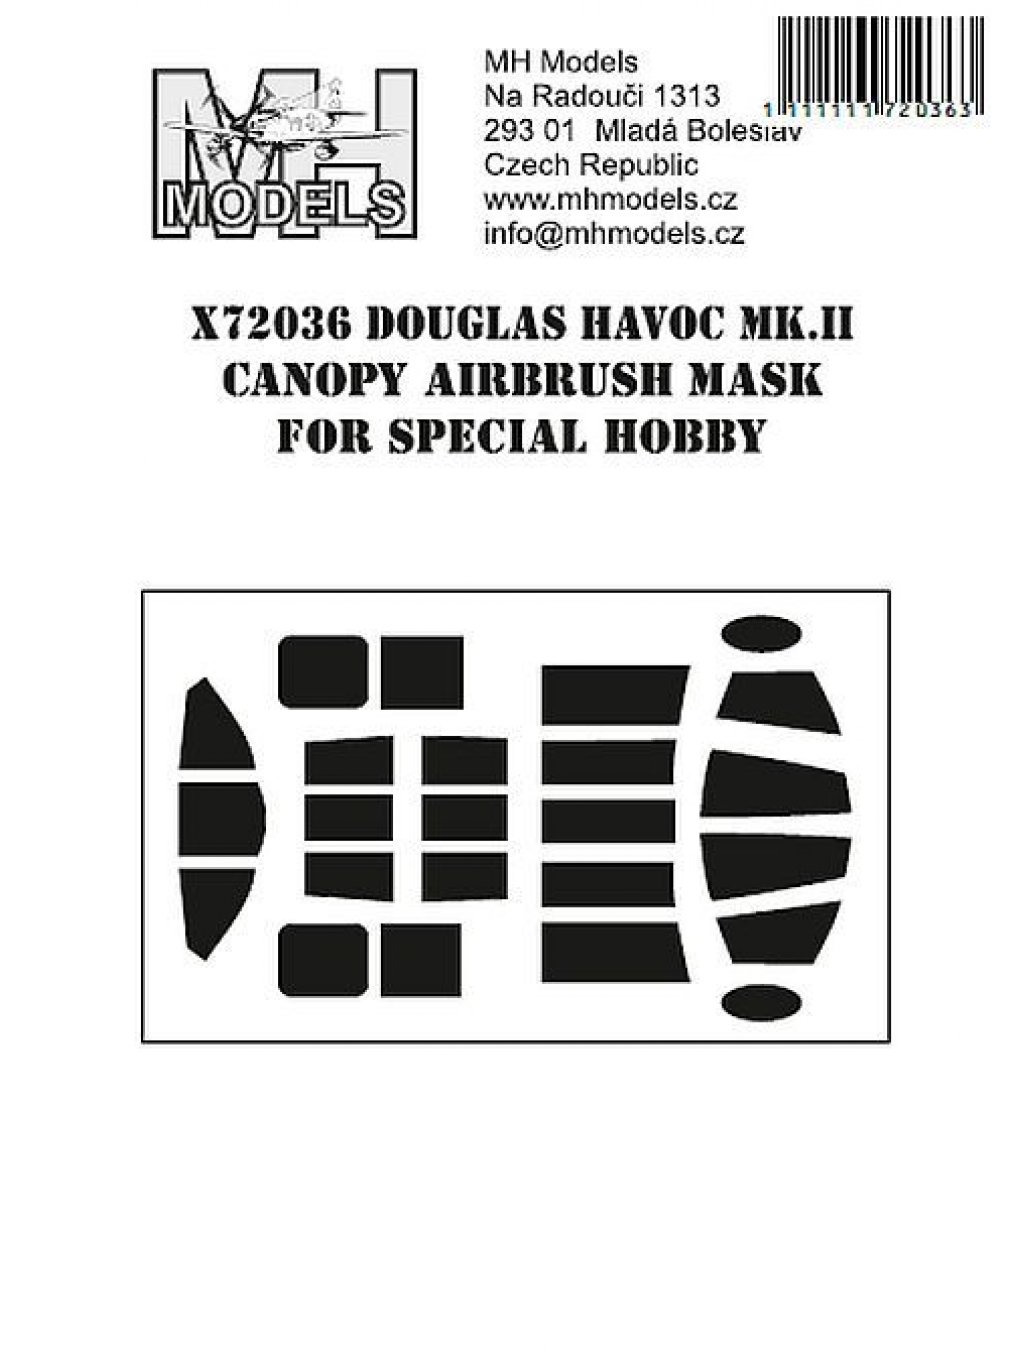 Douglas Havoc Mk.II Canopy airbrush mask for Special Hobby